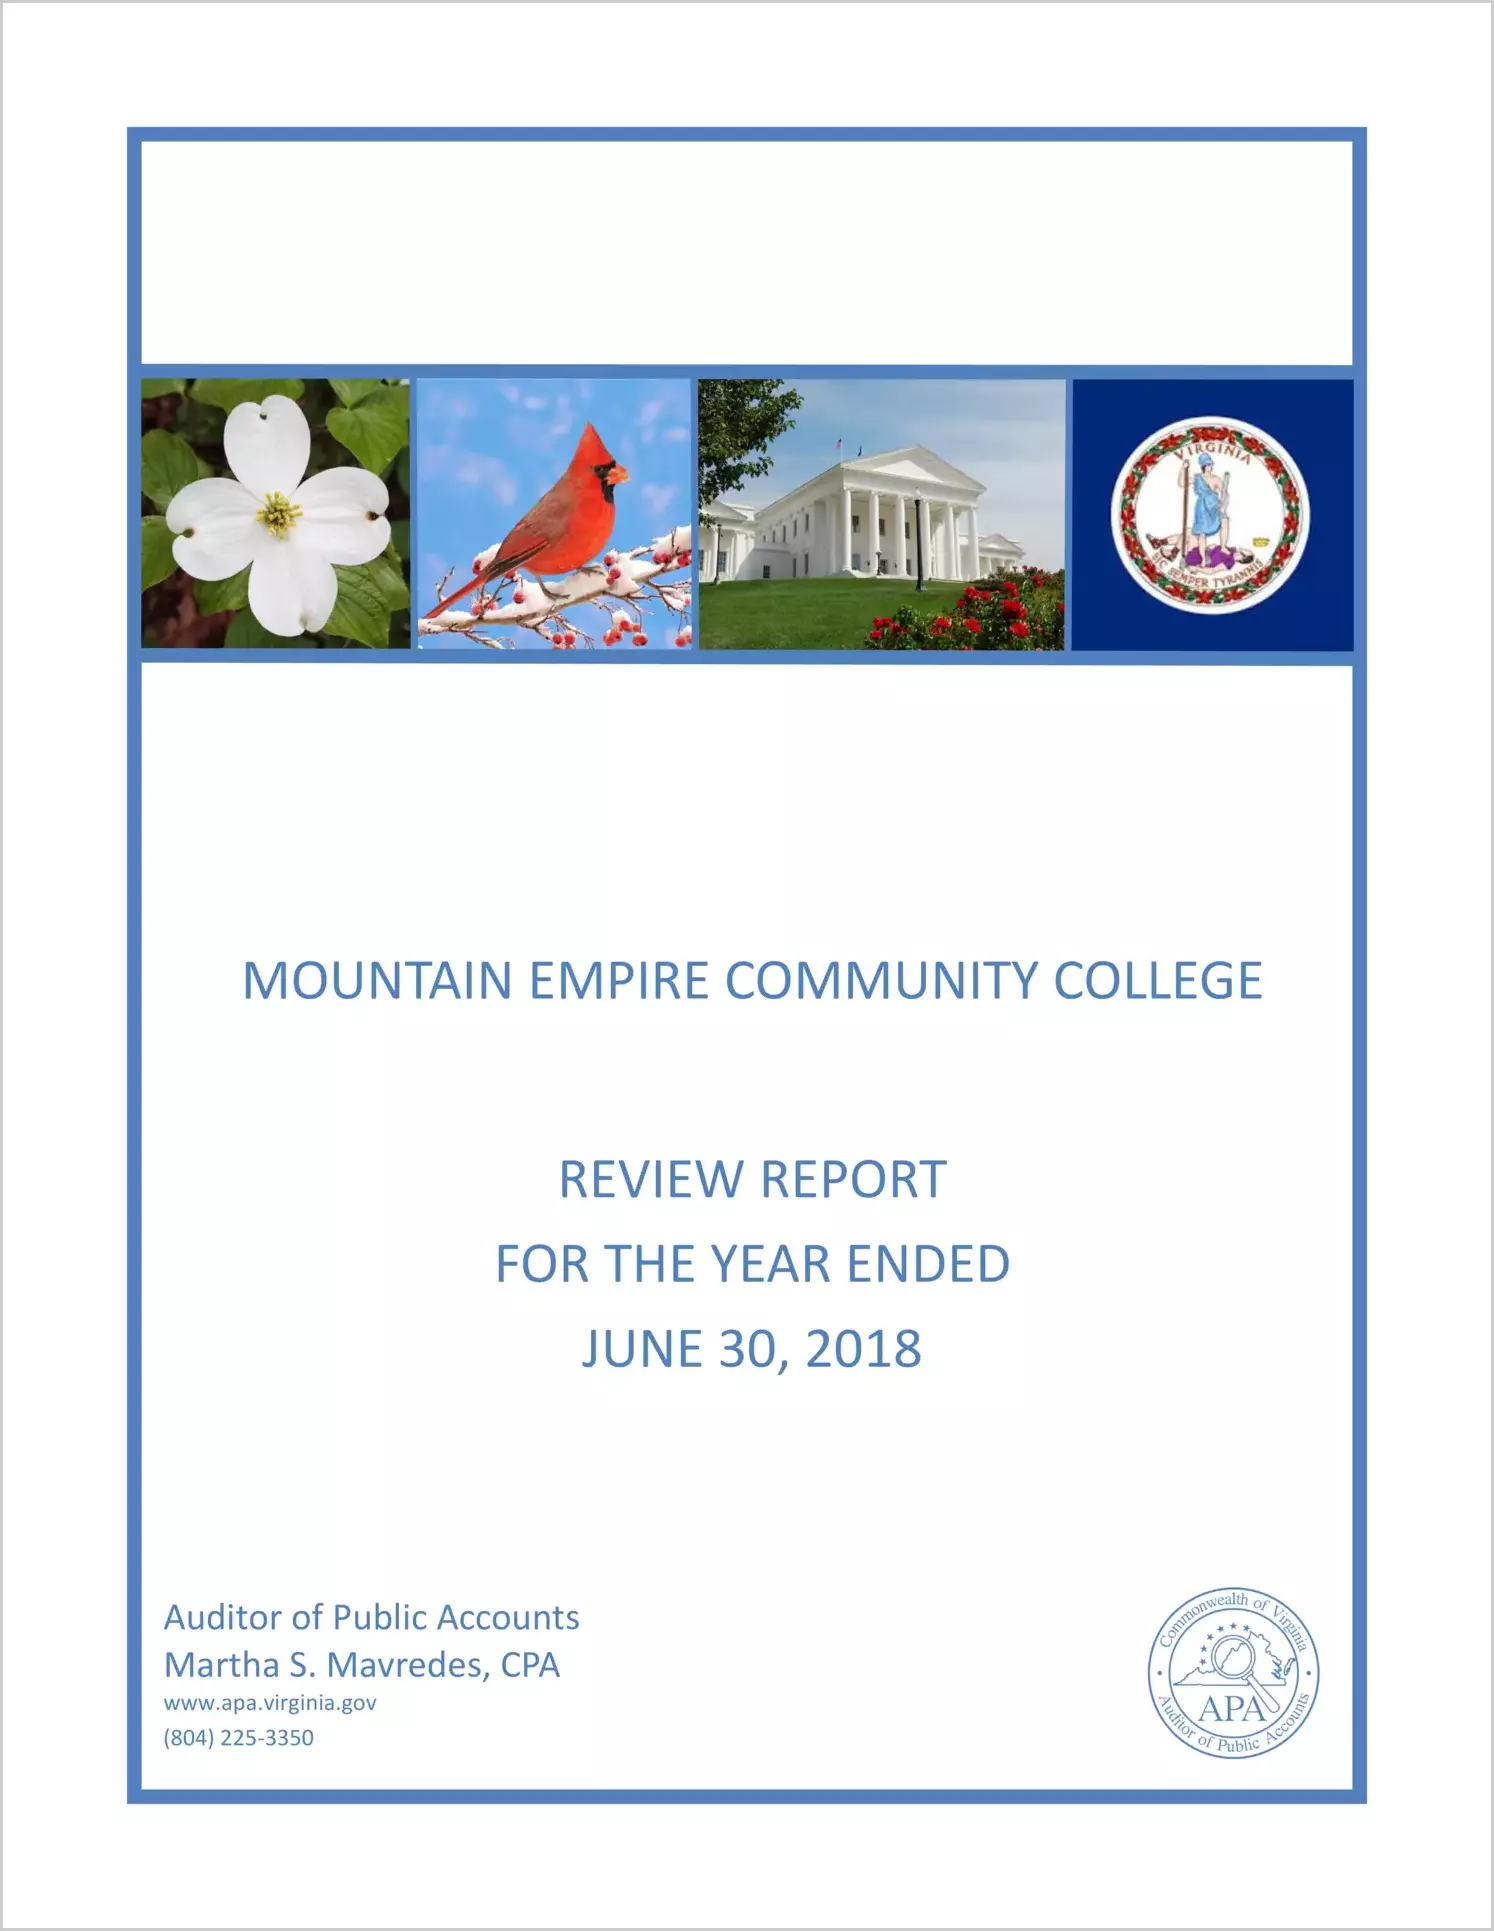 Mountain Empire Community College Review for the year ended June 30, 2018